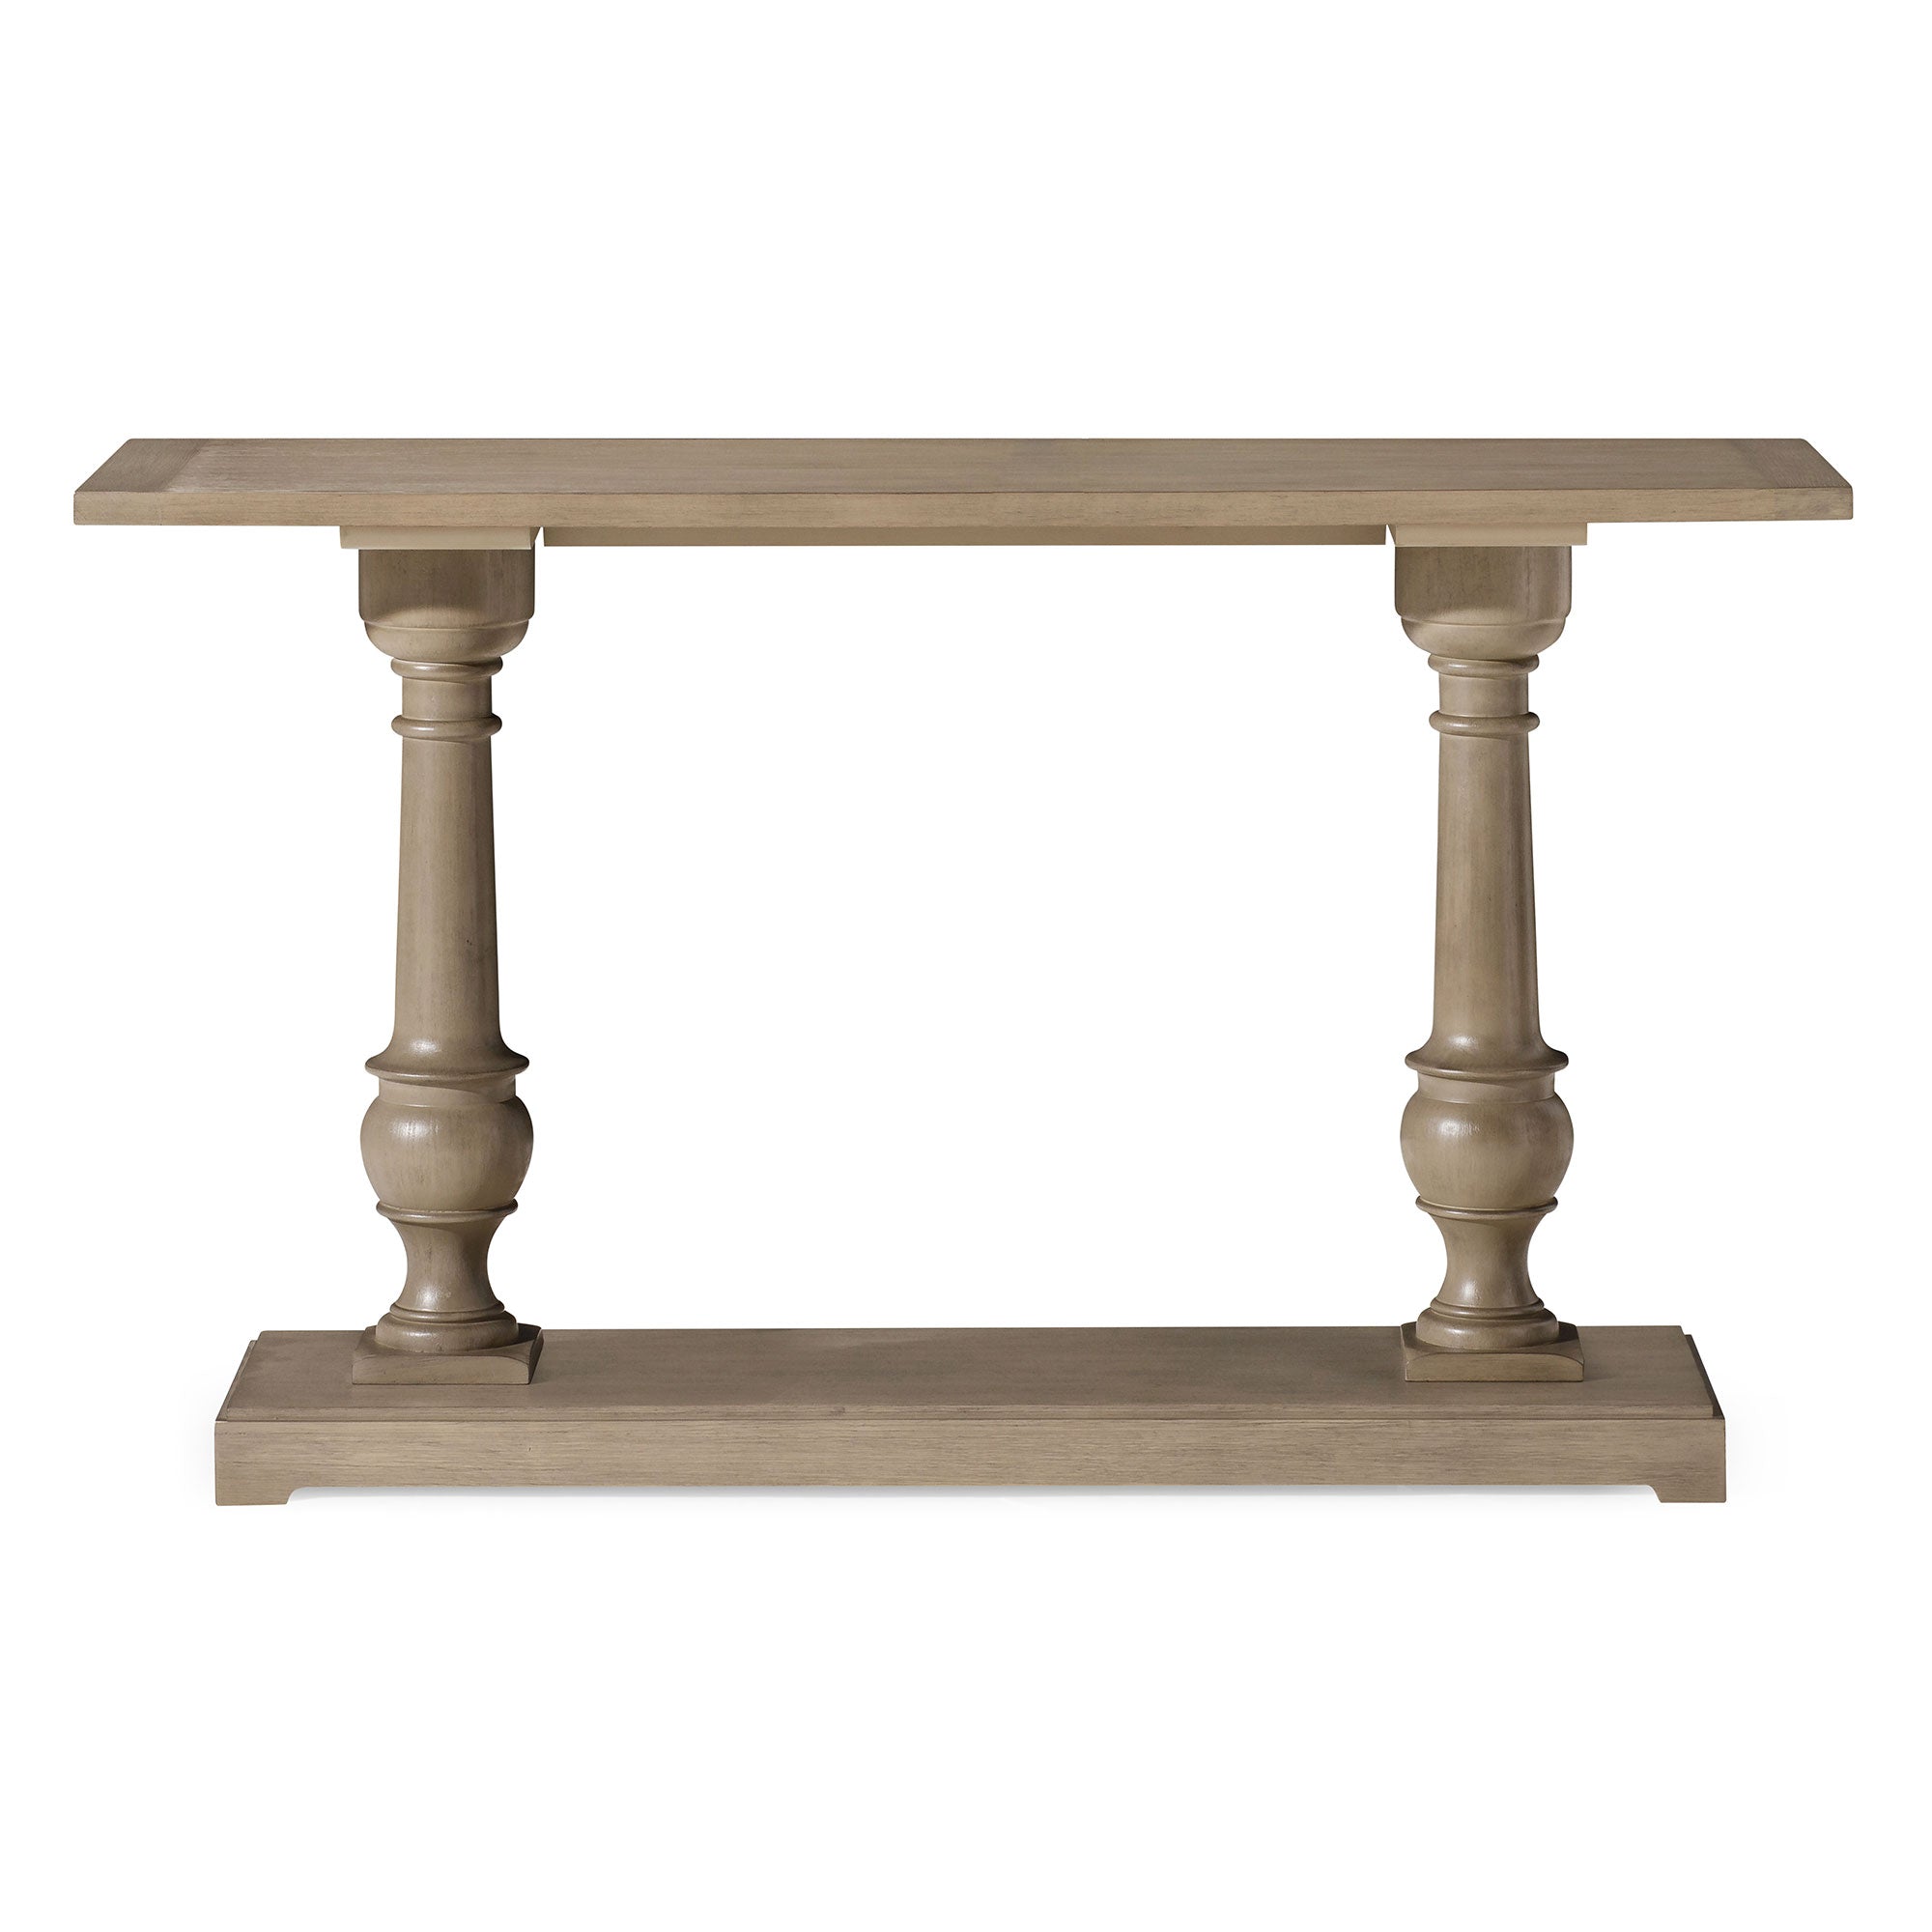 Arthur Classical Wooden Console Table in Antiqued Grey Finish in Accent Tables by Maven Lane